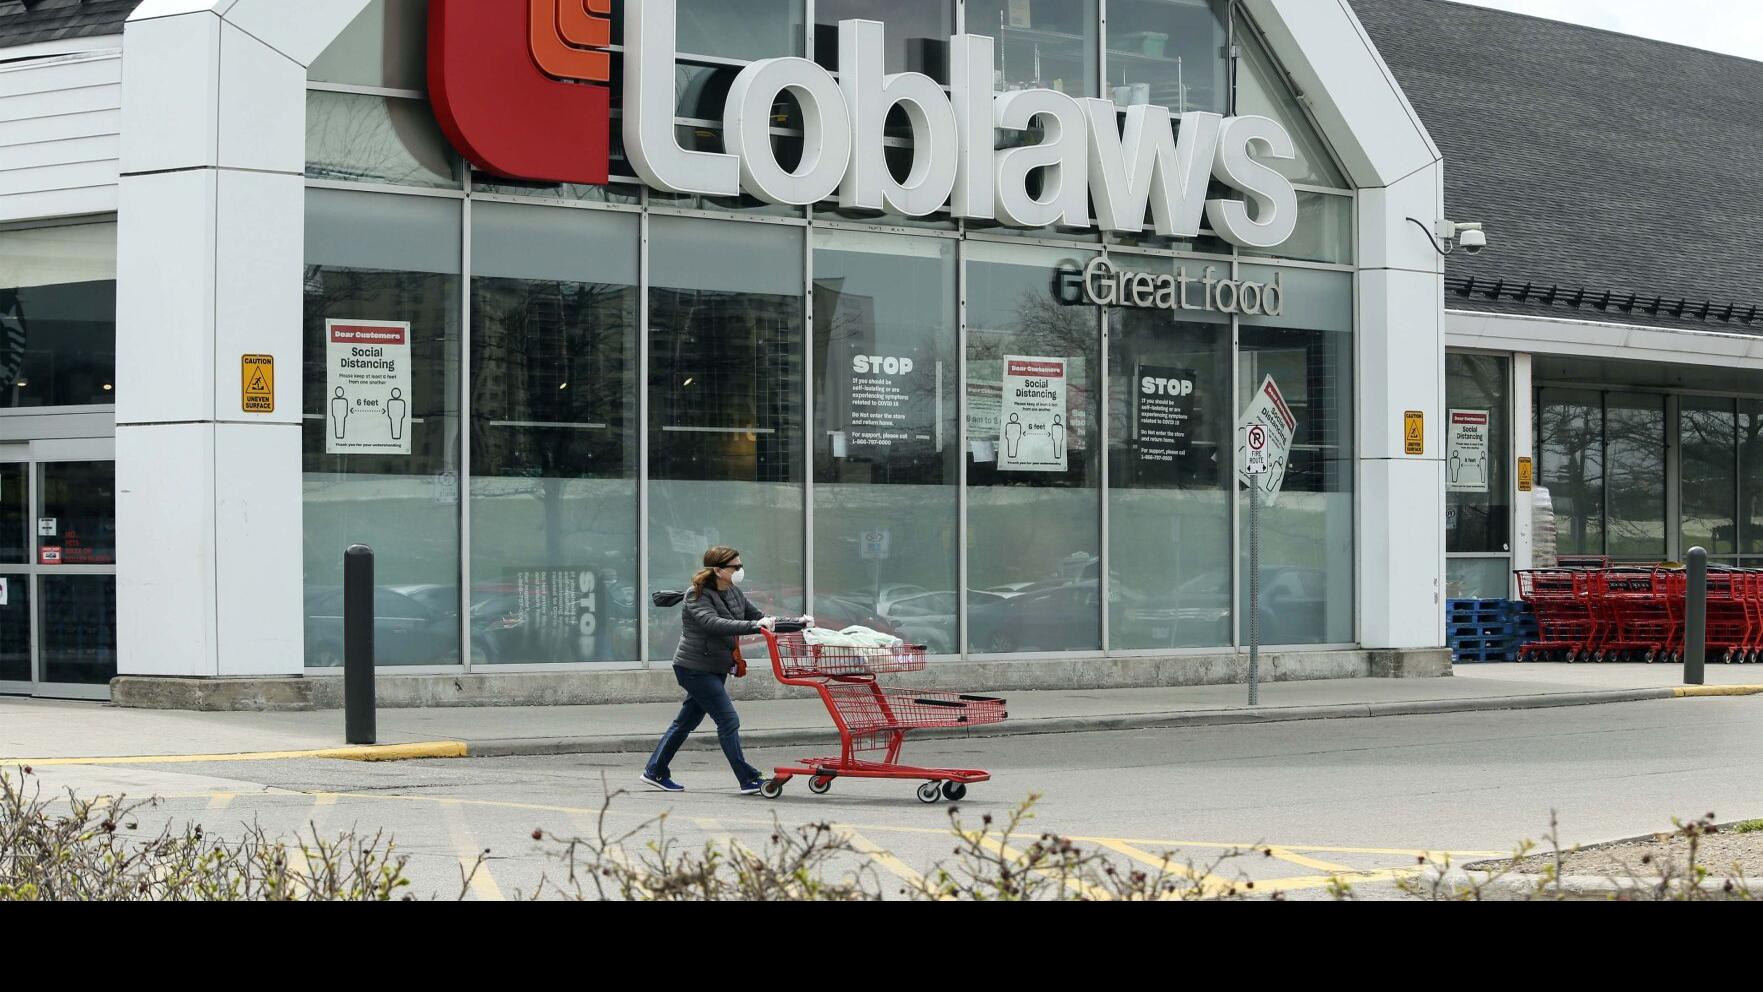 Loblaw to bring back 50% discounts on food nearing expiry